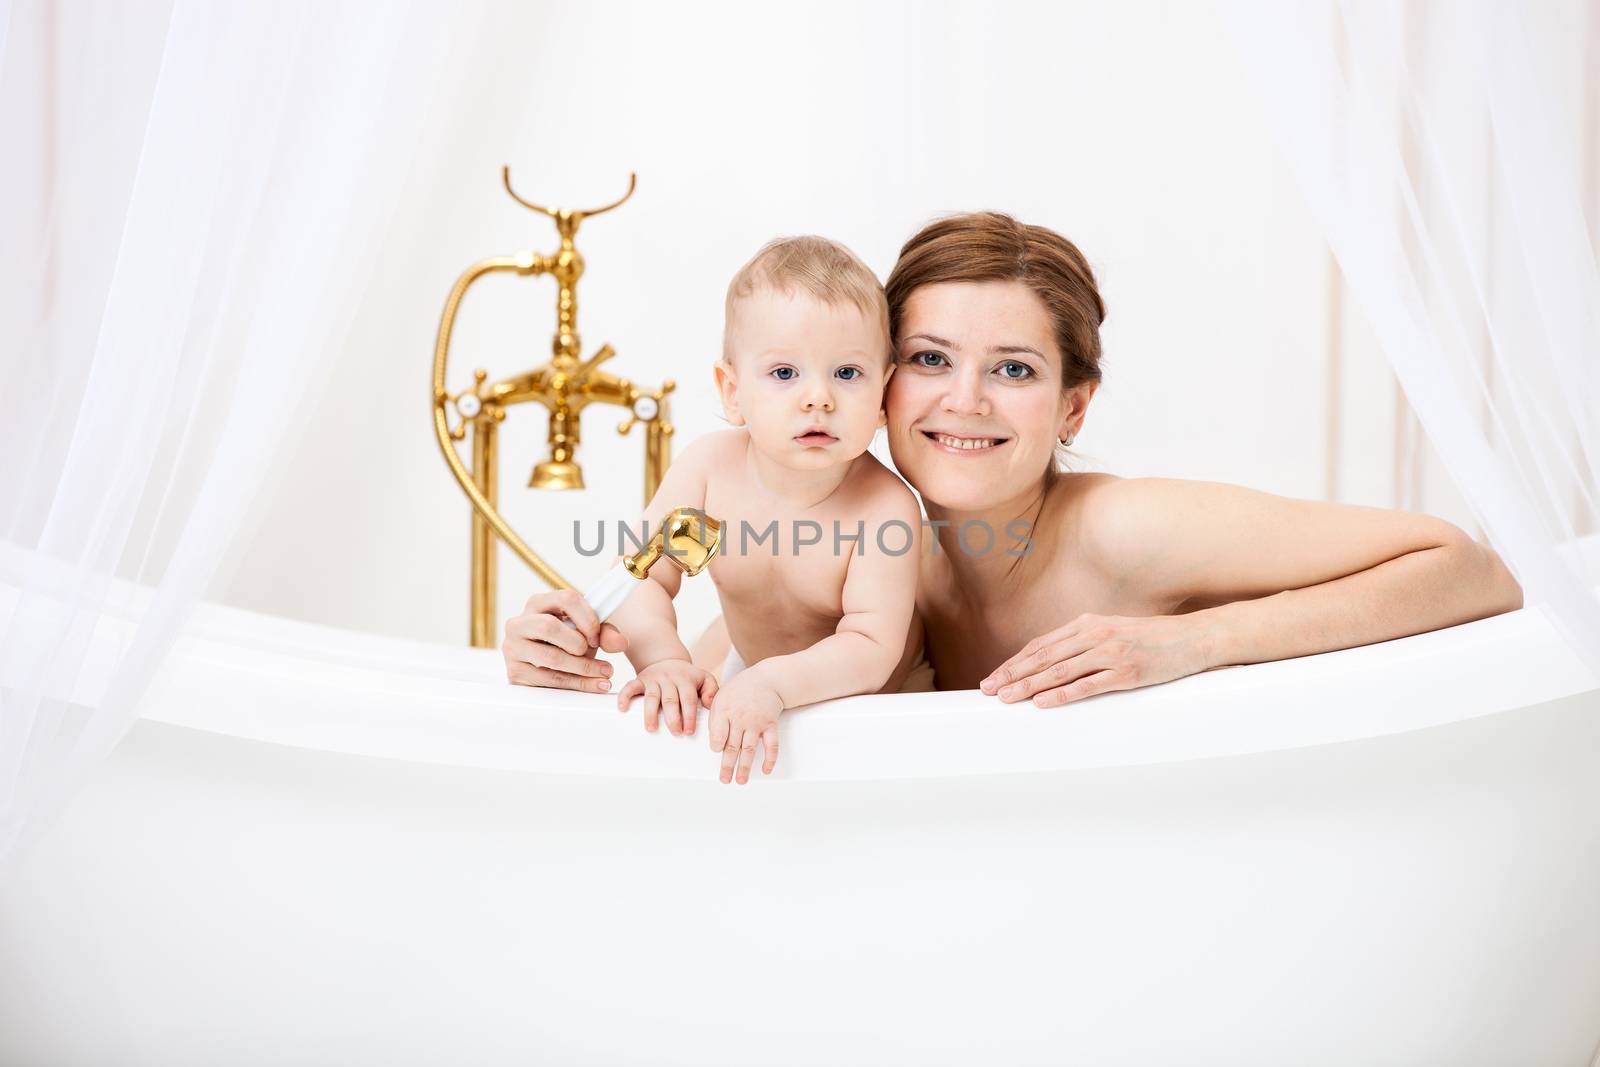 Loving mother and little son in bathtub